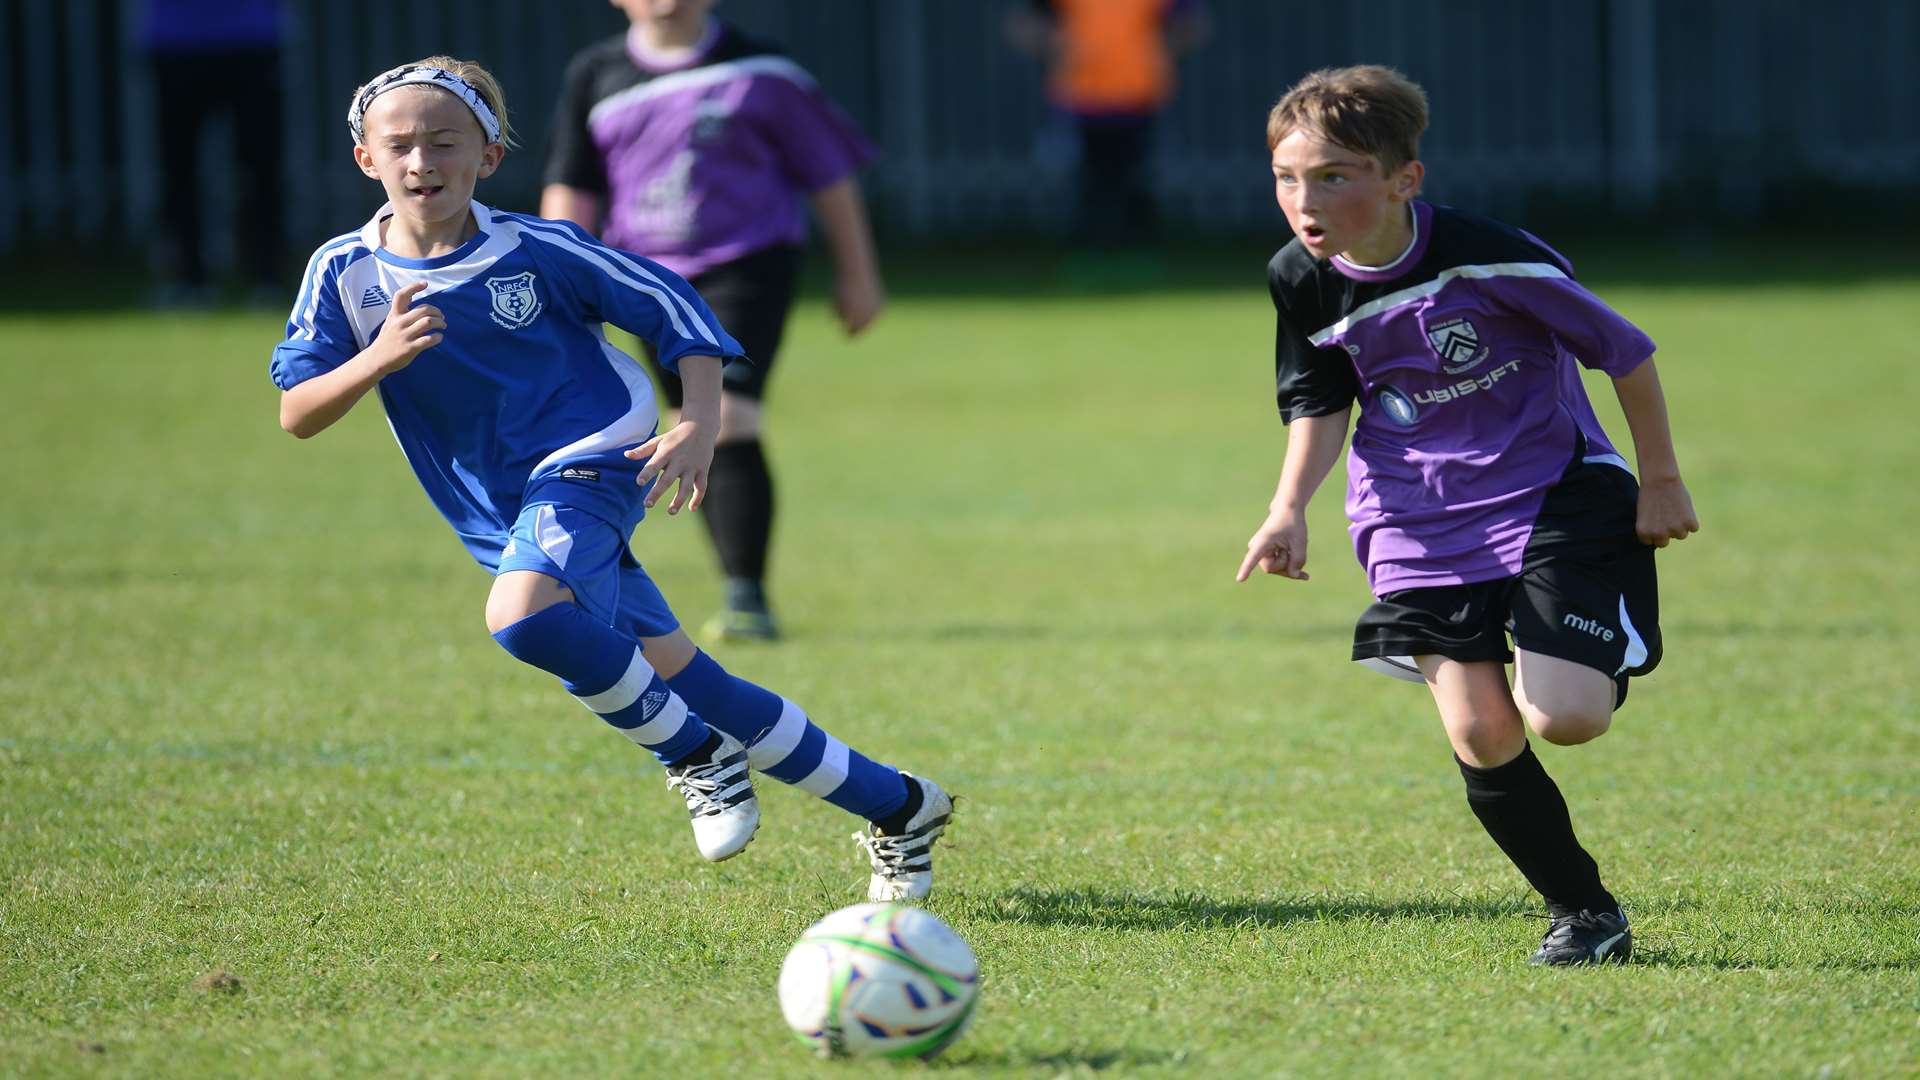 Anchorians Panthers and New Road do battle in Under-12 Division 2 Picture: Gary Browne